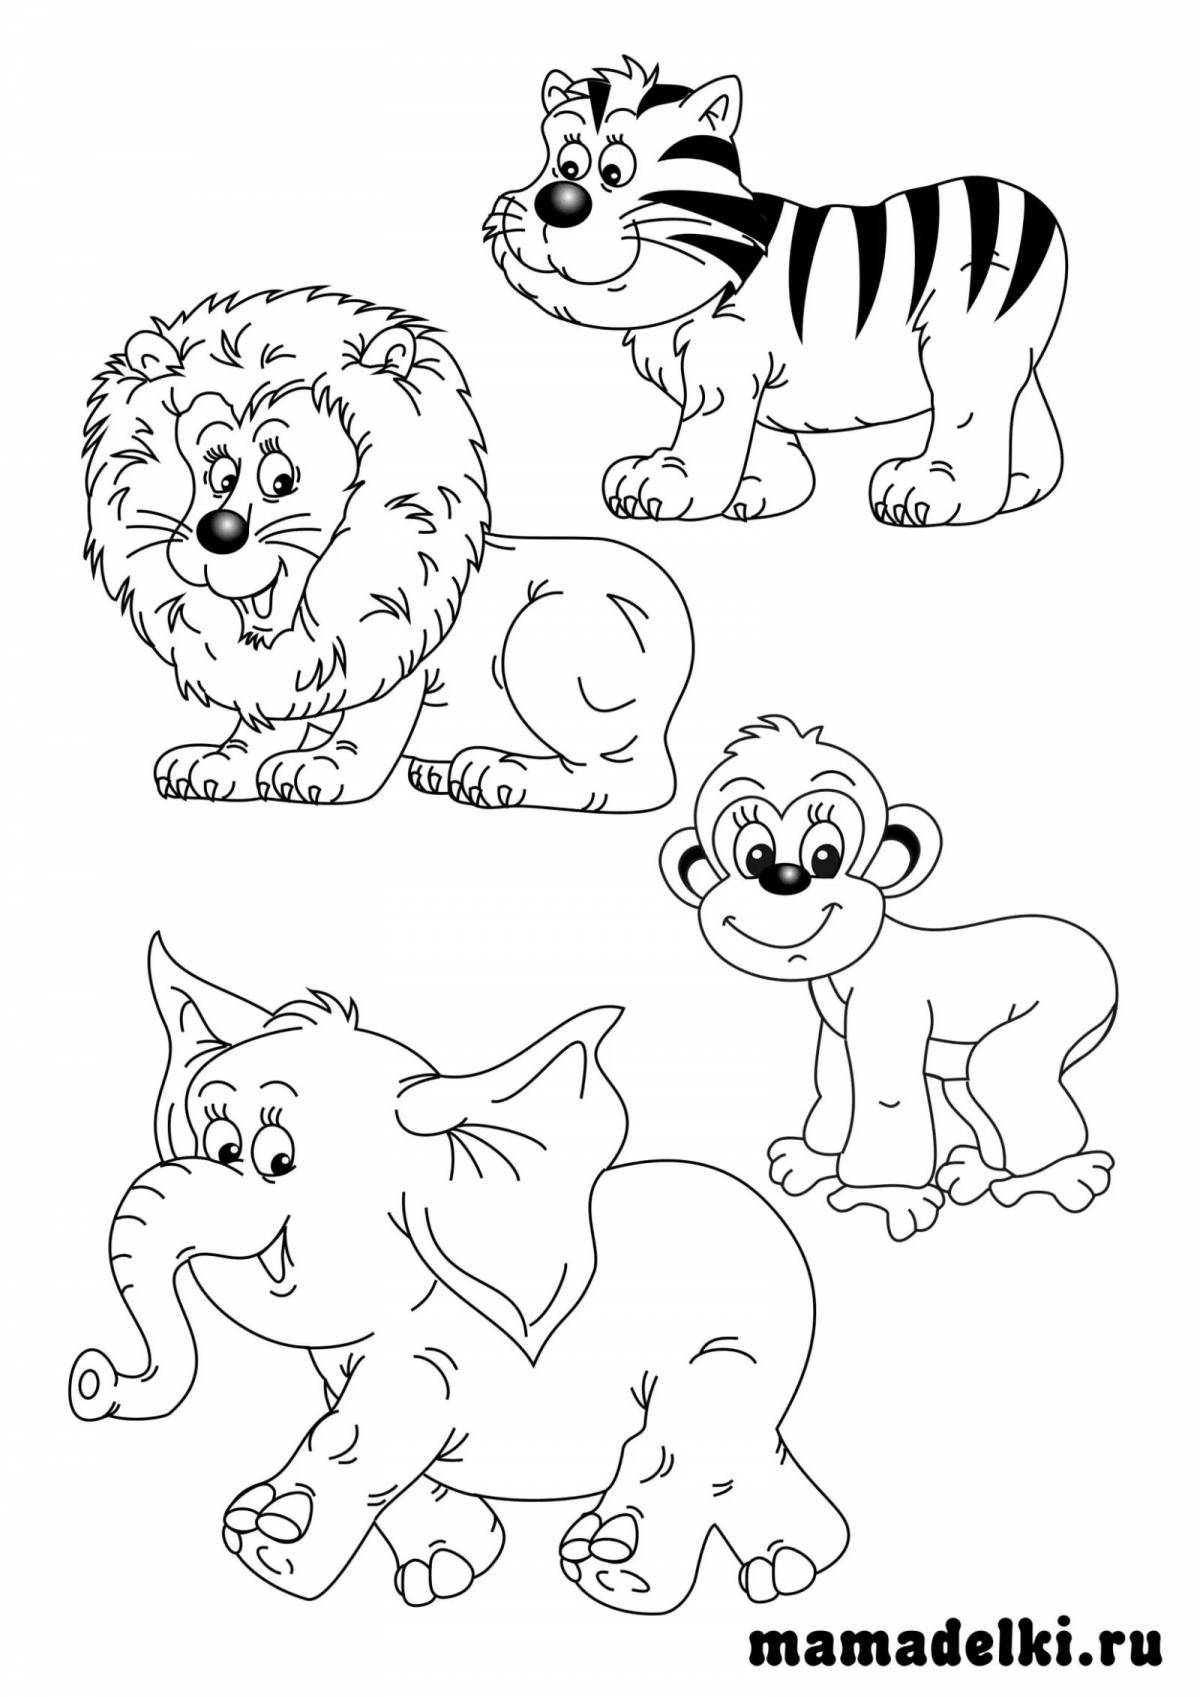 Vibrant wild animal coloring page